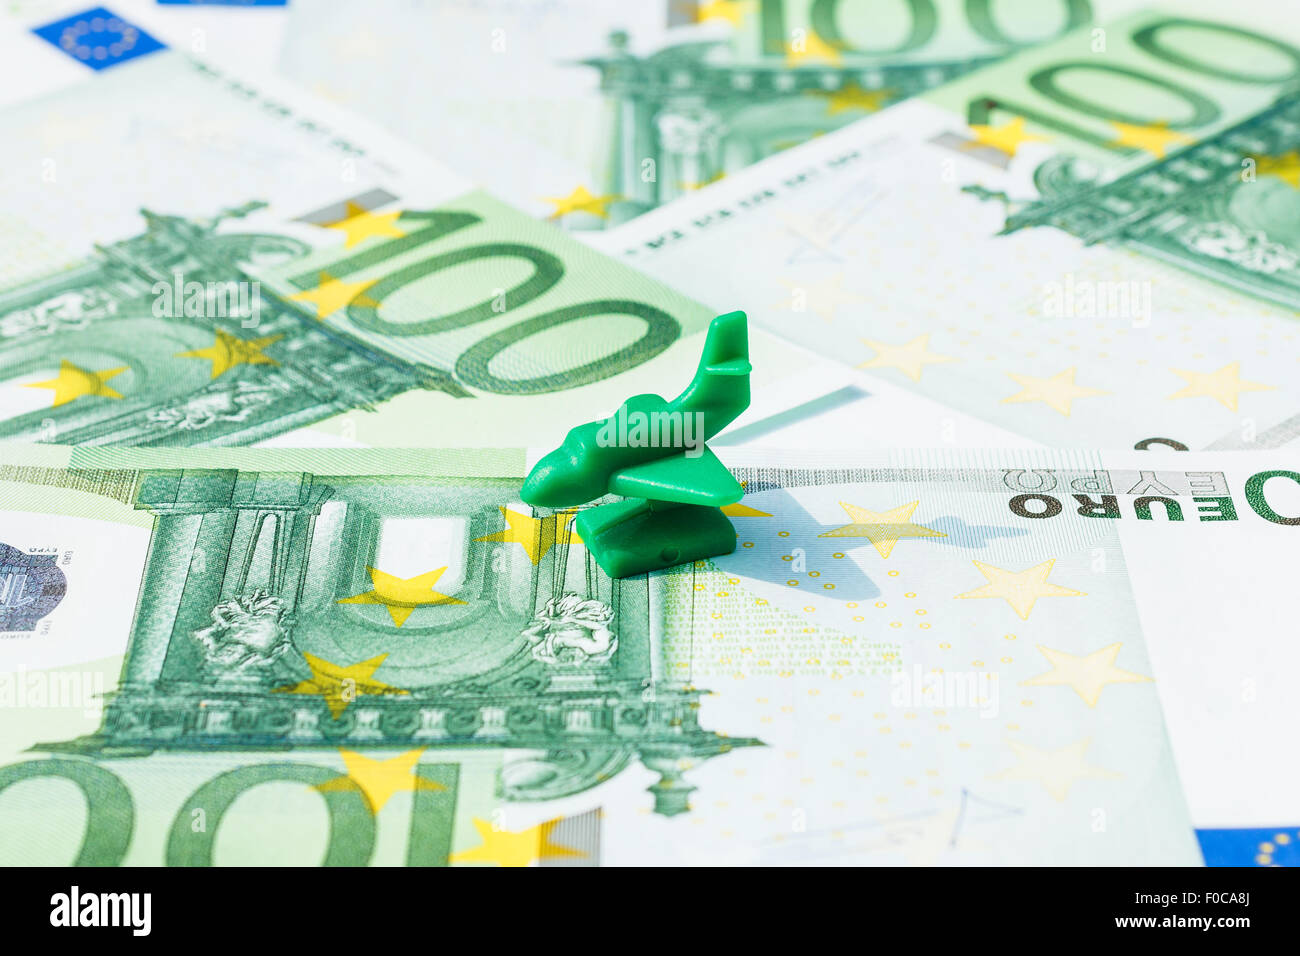 Concept travel, vacation, holiday, salary, savings, transport on hundred euro banknotes. Focus on green airplane, jet. Stock Photo